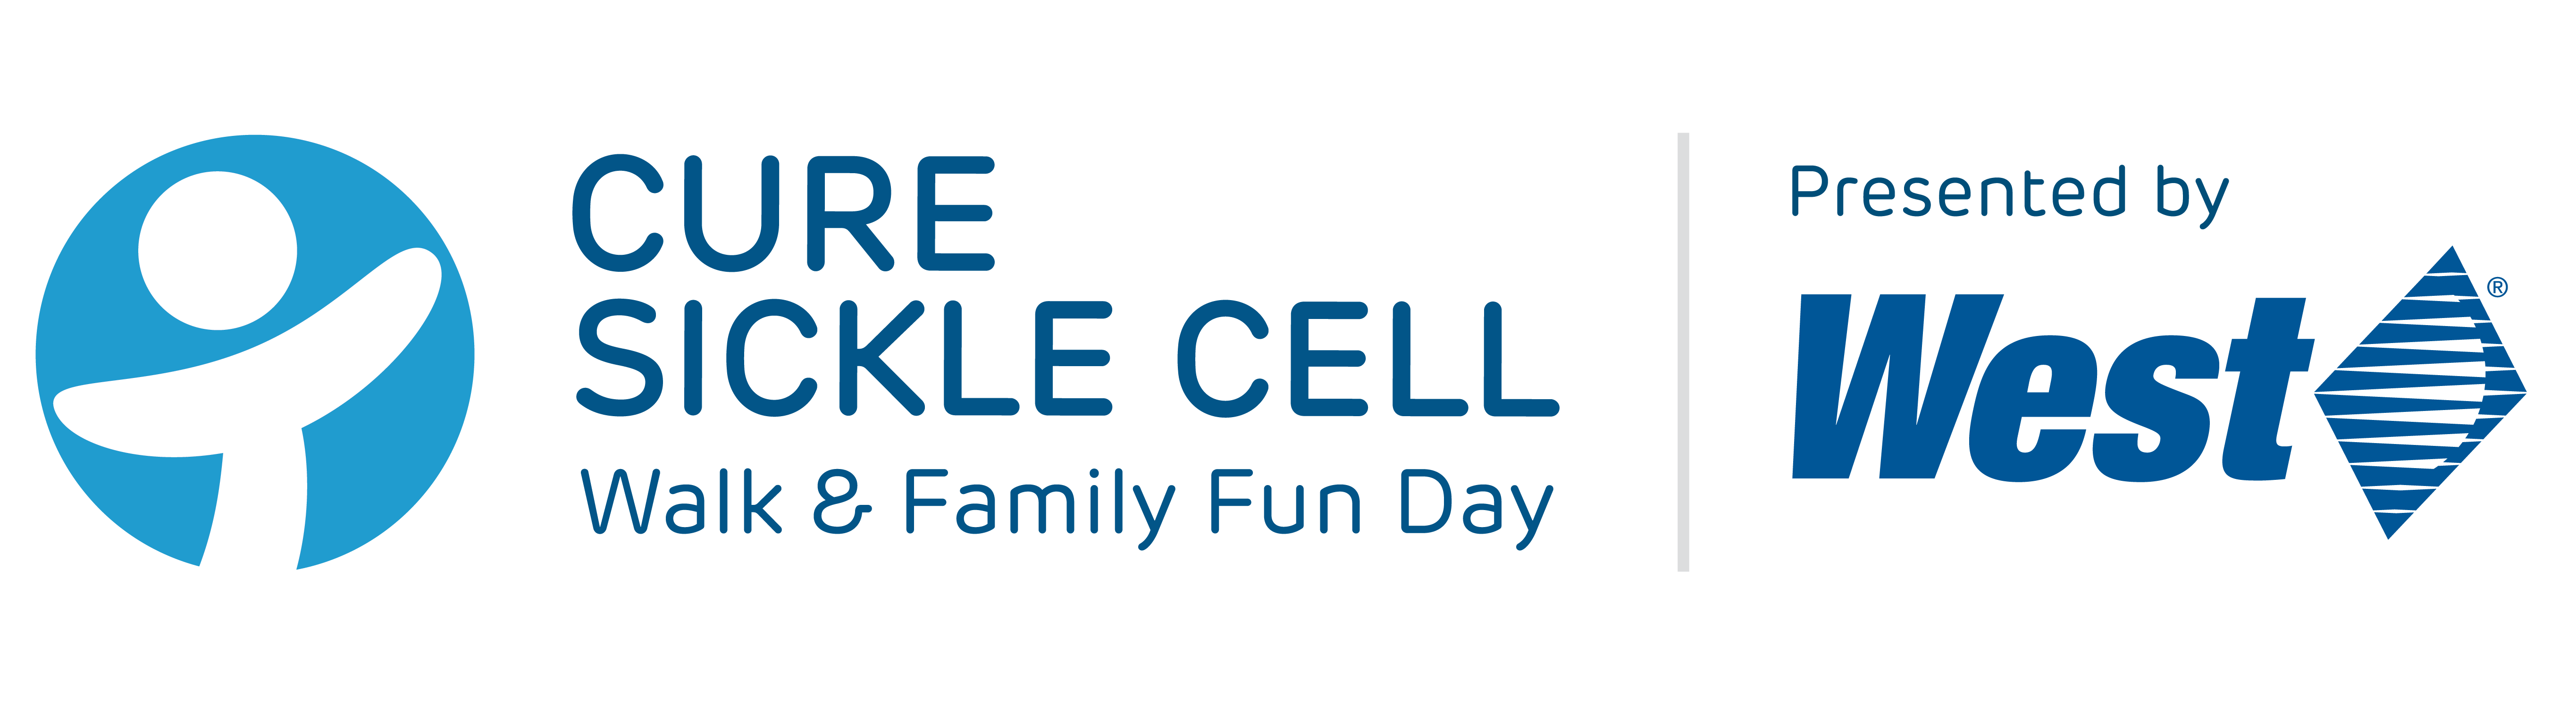 Cure Sickle Cell Walk & Family Fun Day